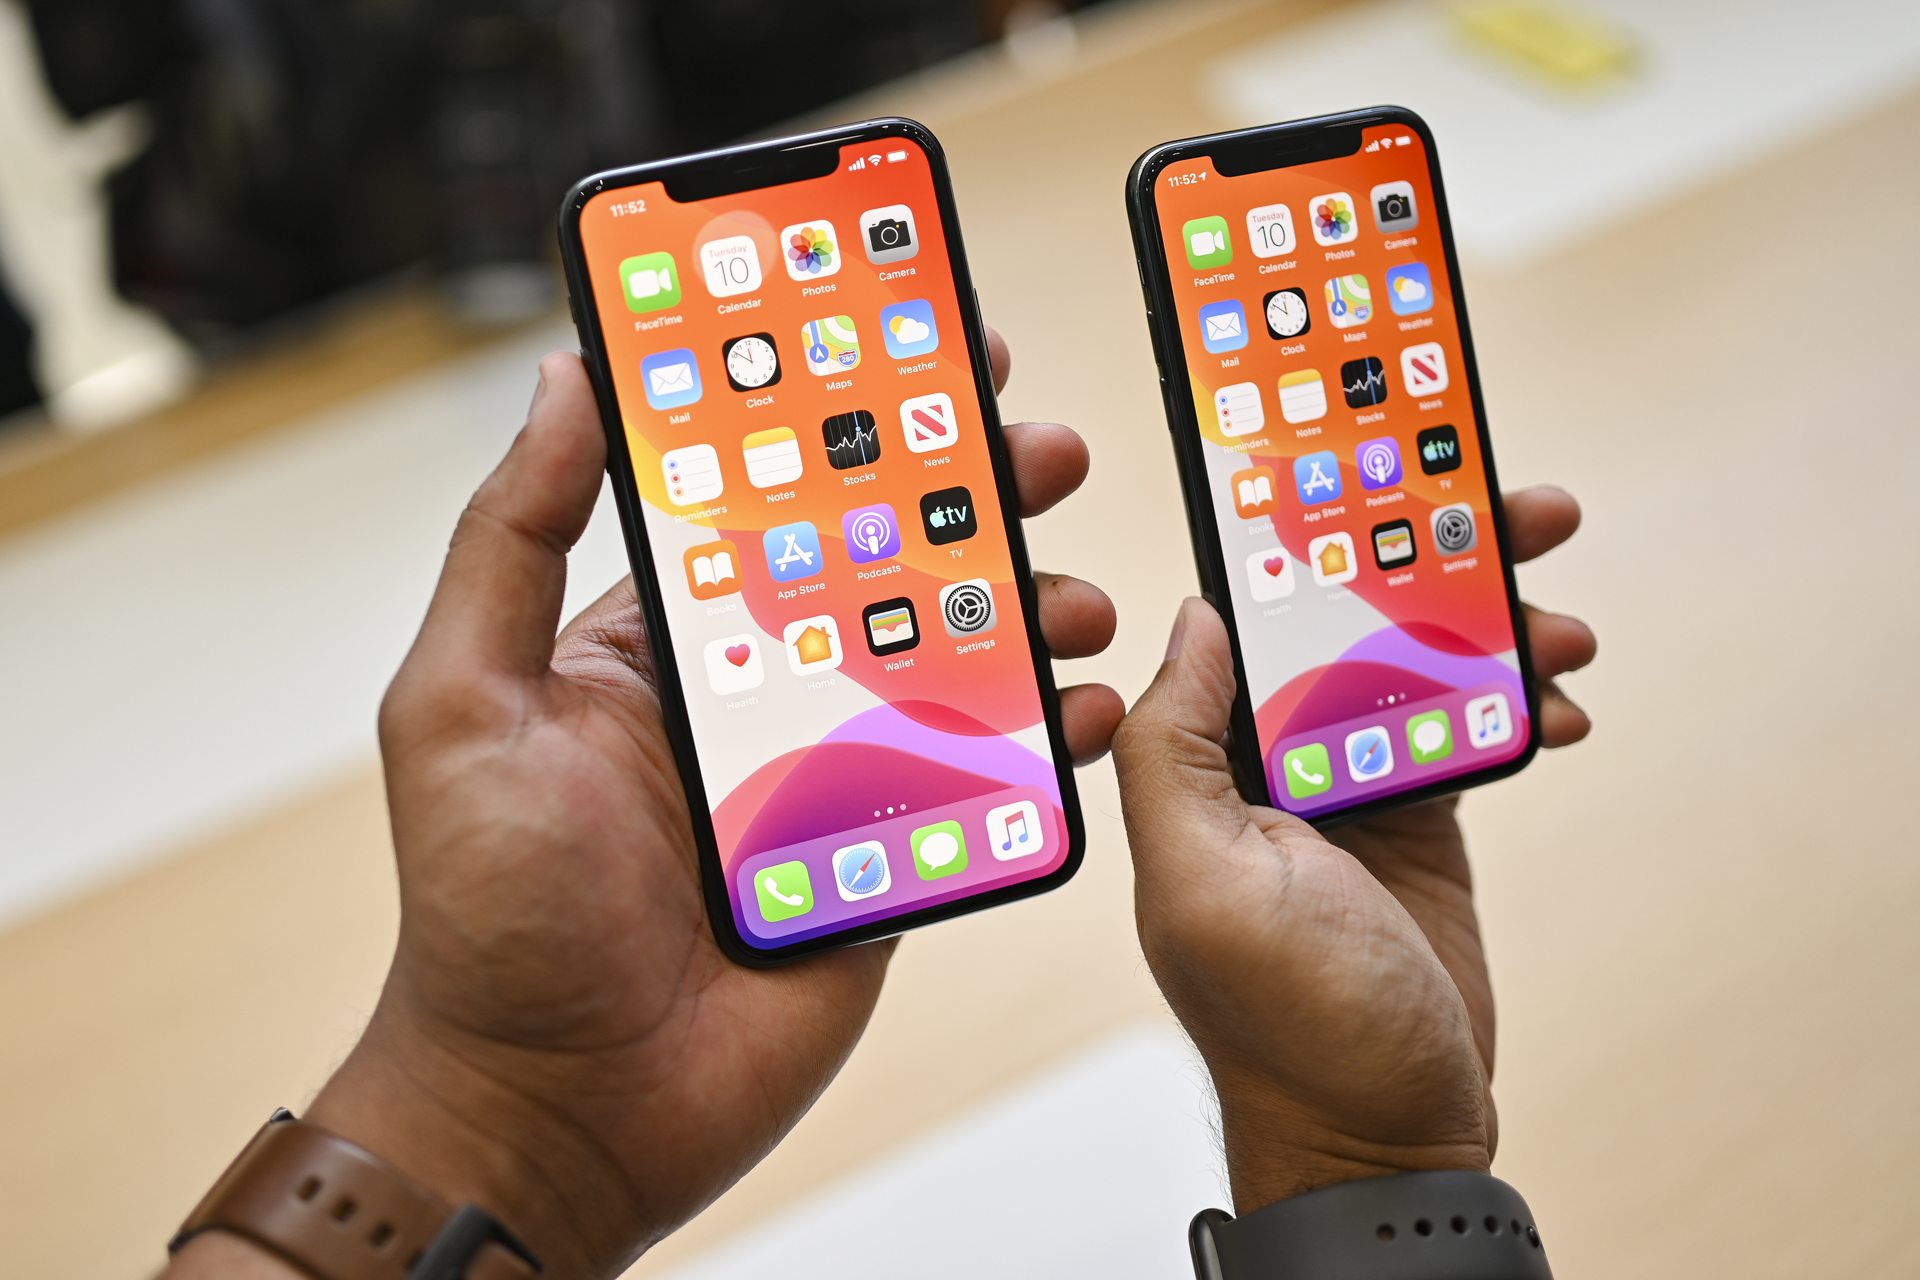 iPhone 11, iPhone 11 Pro, and iPhone 11 Pro Max: Hands-on with